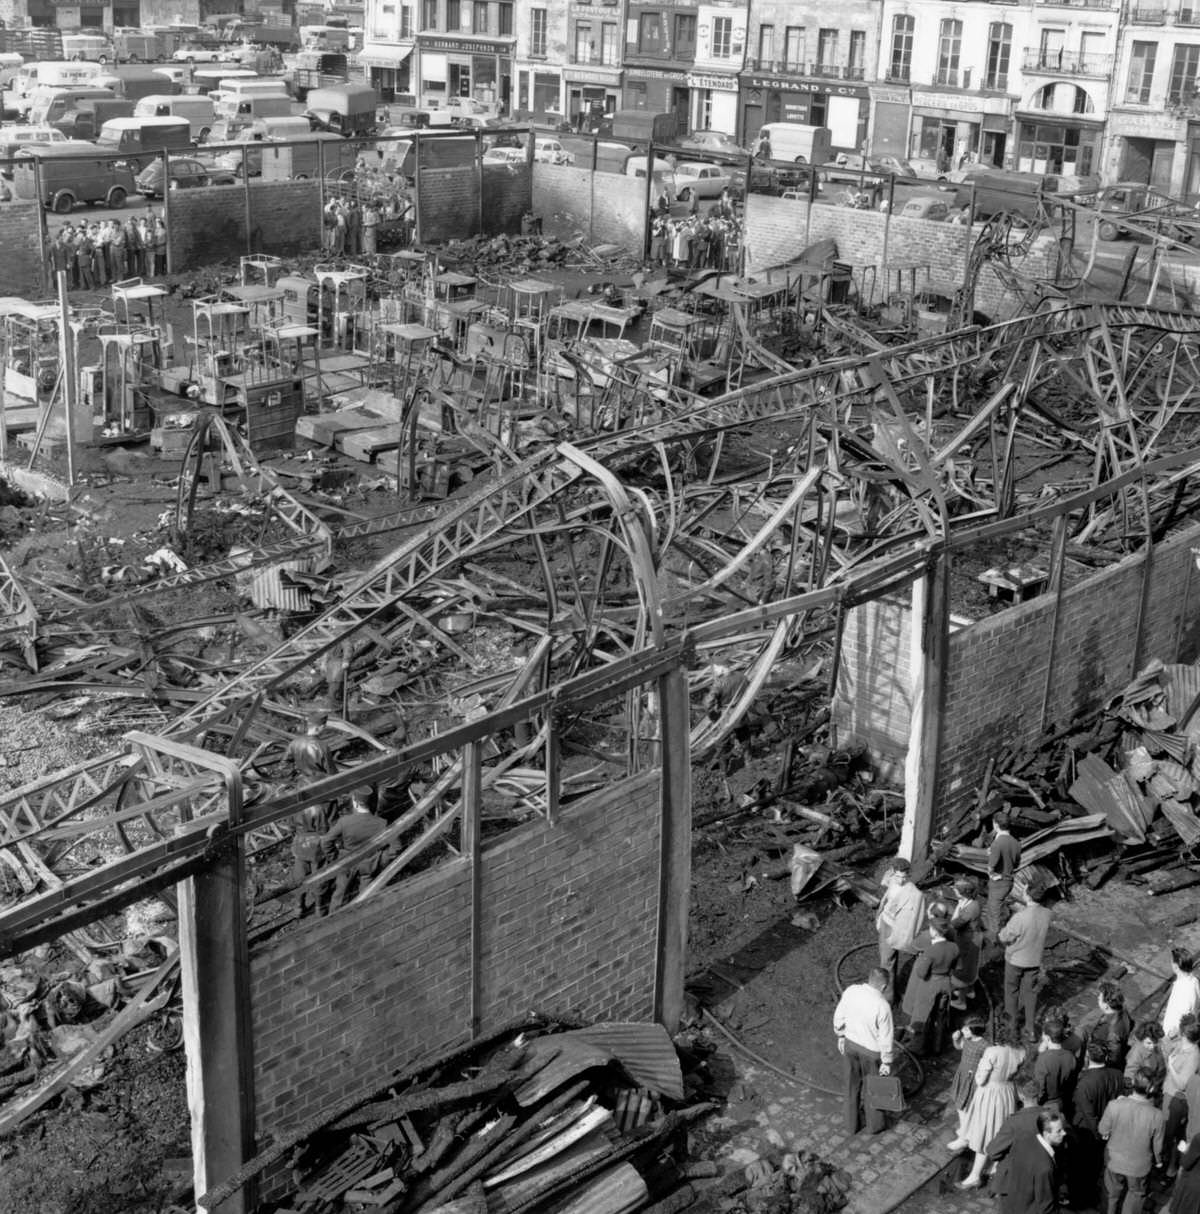 After The Fire at Les Halles Warehouse, 1959